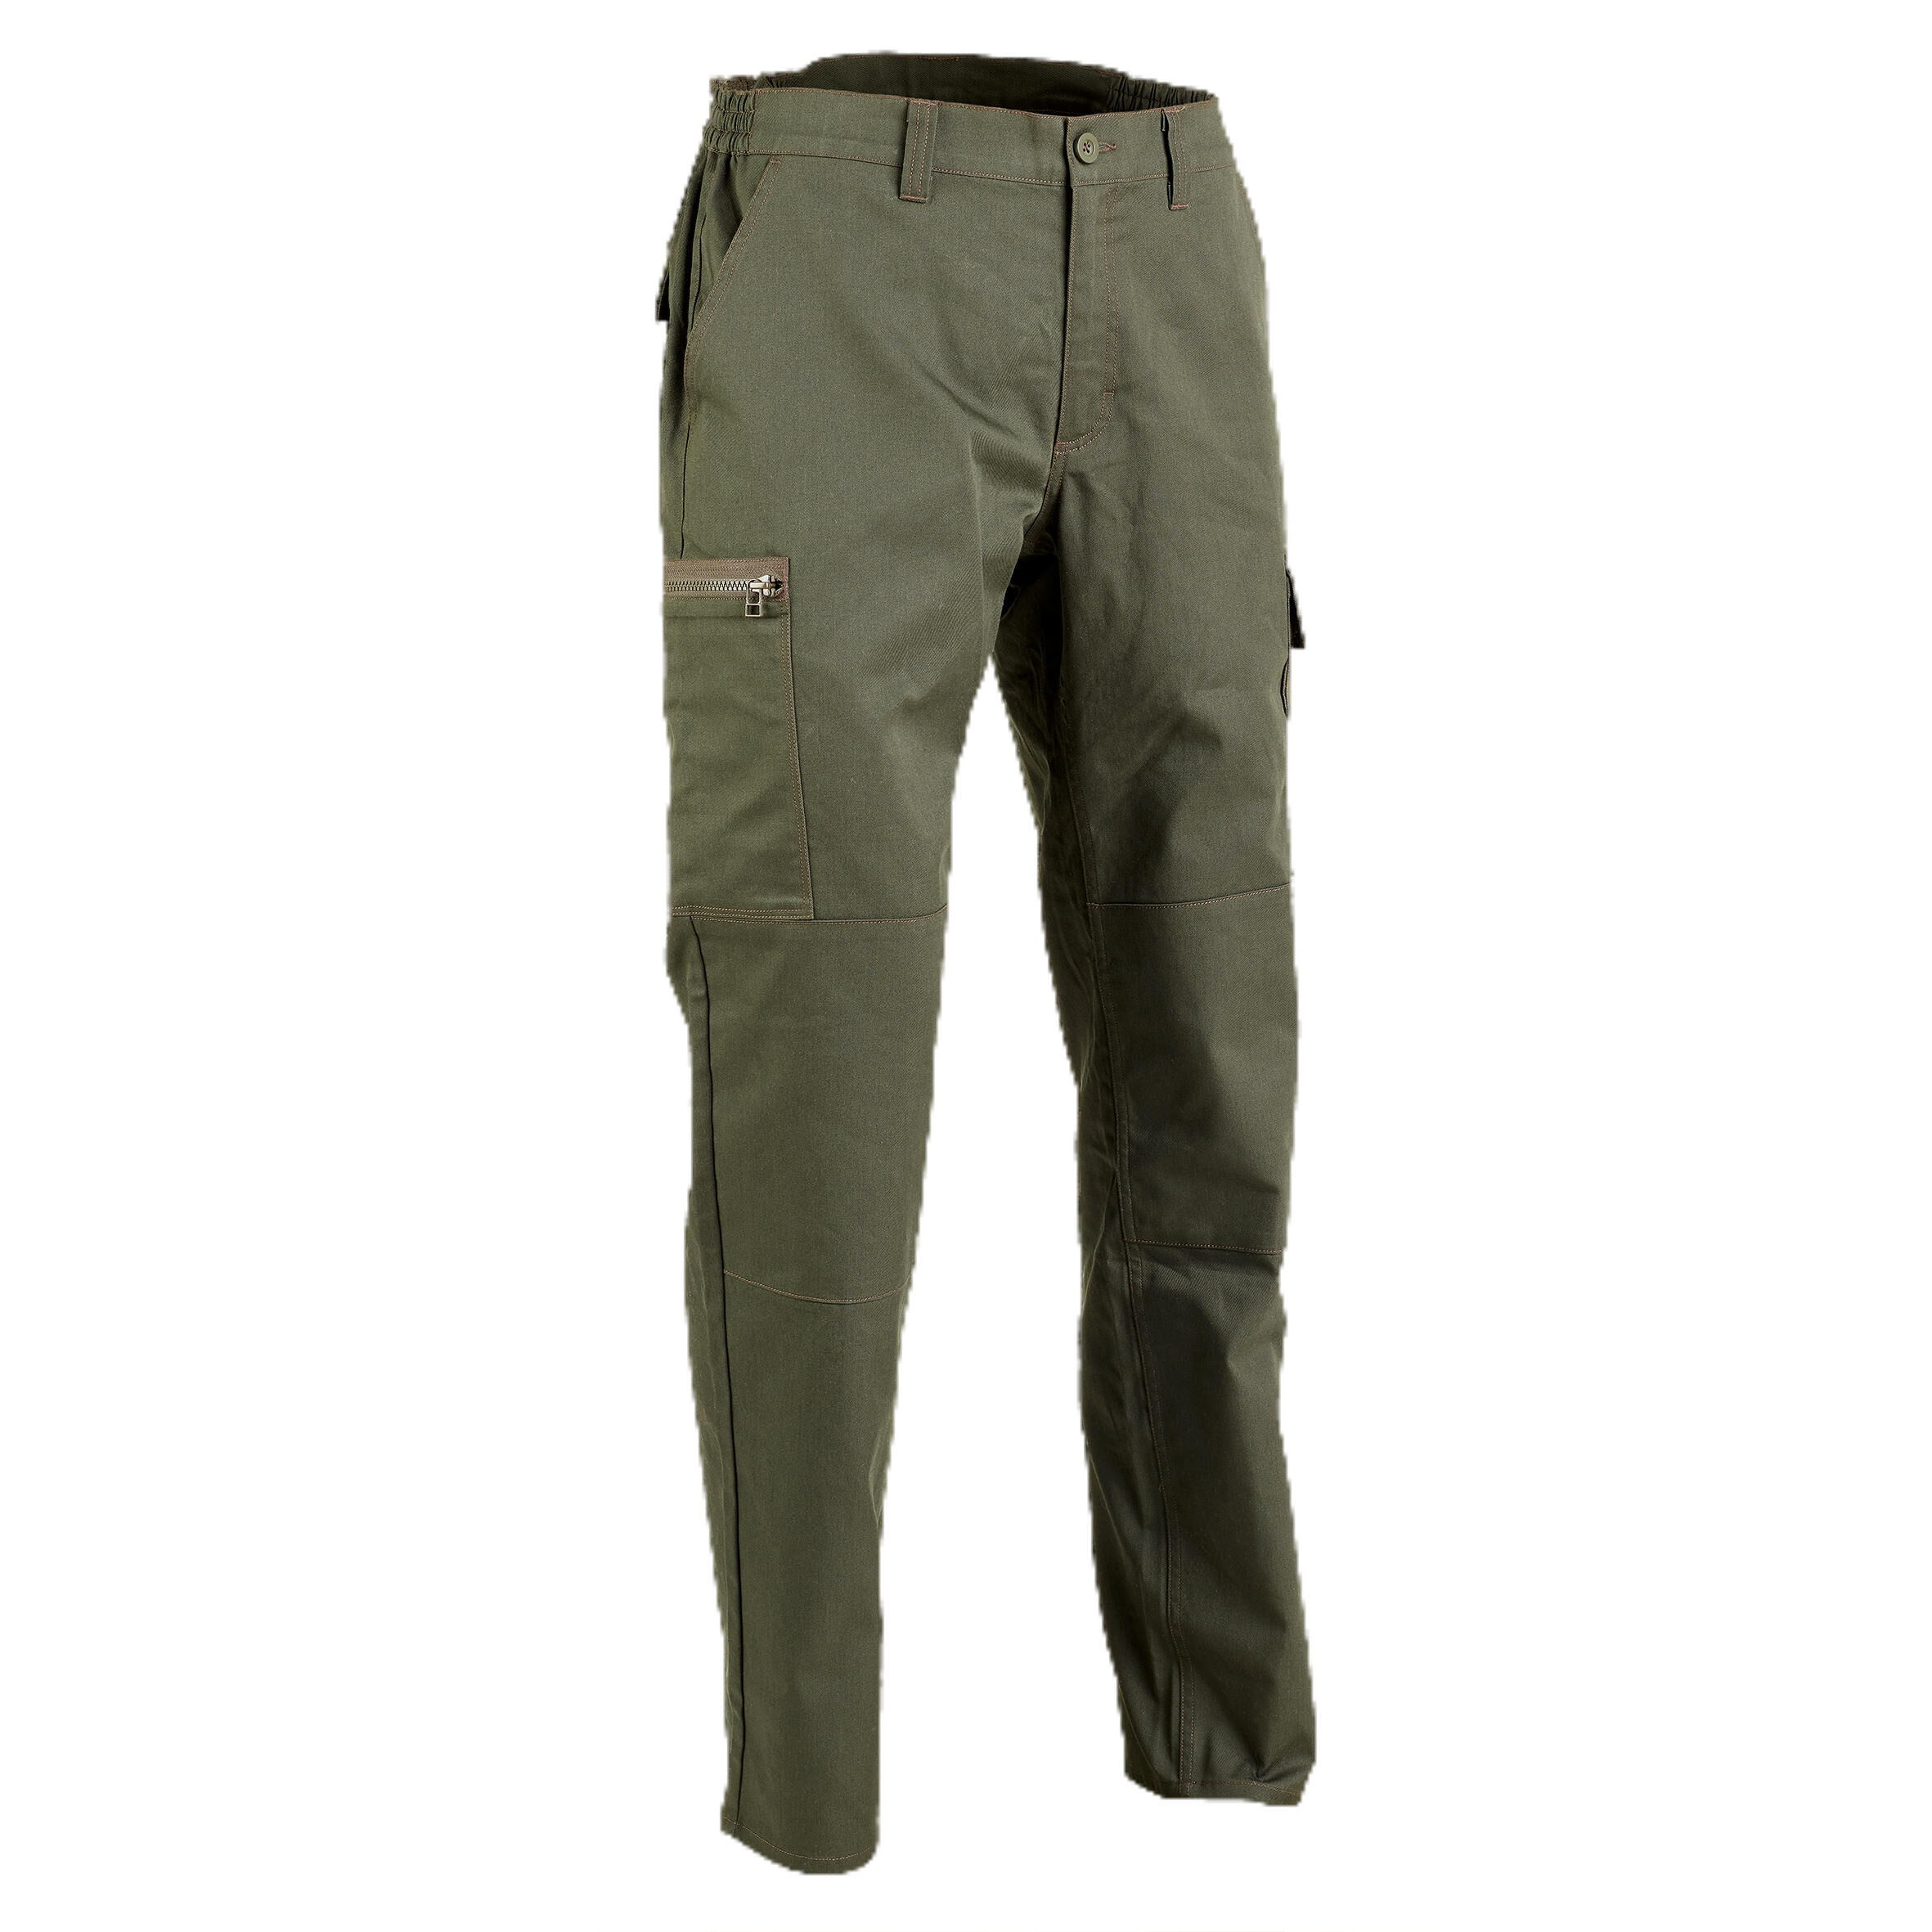 SOLOGNAC Men's Regular Trousers - Steppe 300 Limited Edition green